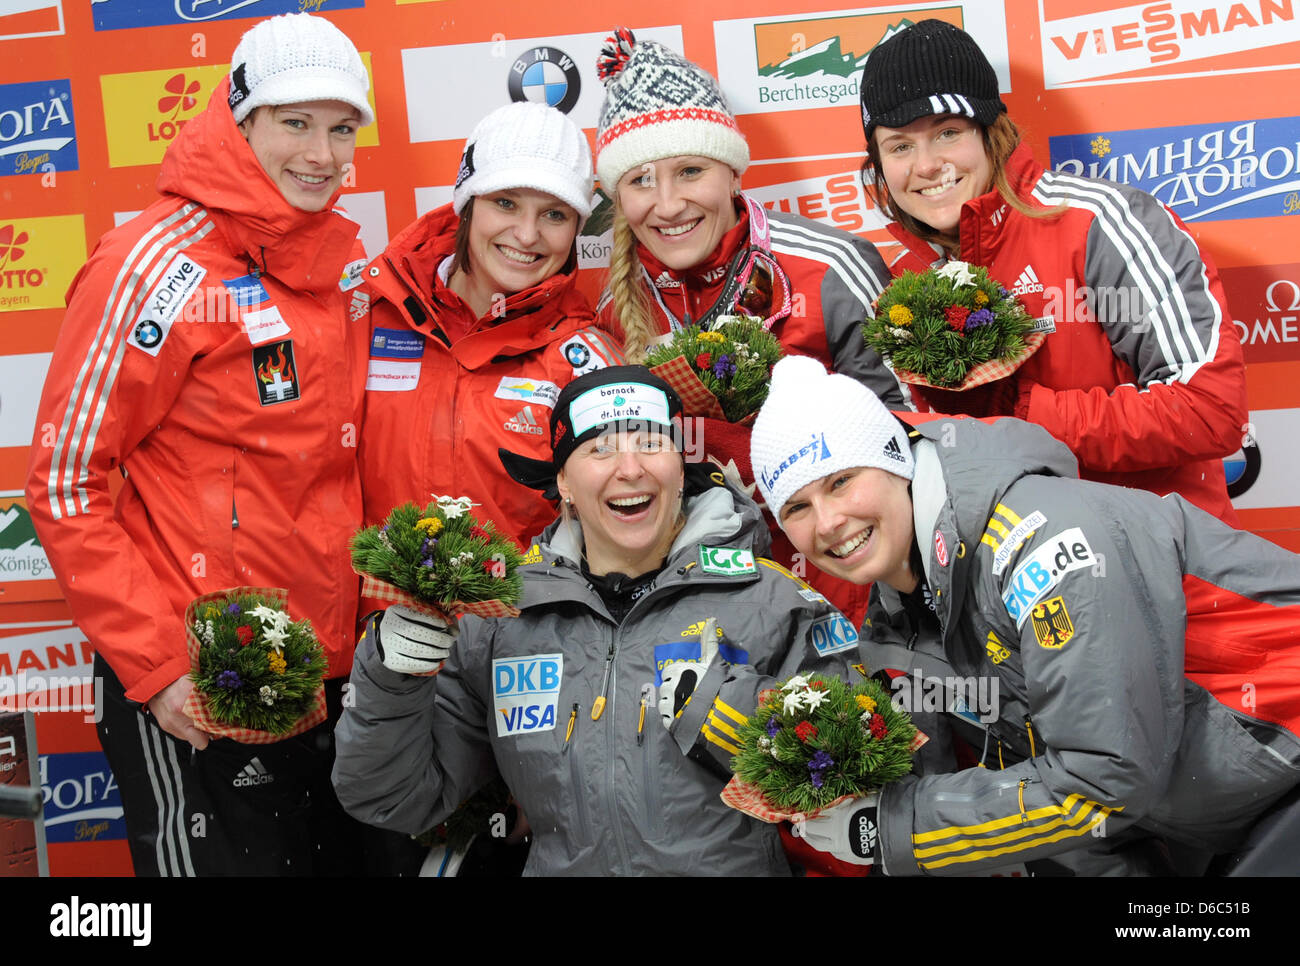 Bobsledders Hanne Schenk (back, L-R) and Fabienne Meyer from Switzerland, Kaillie Humphries and Emily Baadsvik from Canada and   Cathleen Martini (below, L-R) and Berit Wiacker from Germany celebrate their victories during the awards ceremony at the women's two-person bobsleigh world cup in Koenigssee, Germany, 13 January 2012. Martini and Wiacker came in first place in front of Sw Stock Photo